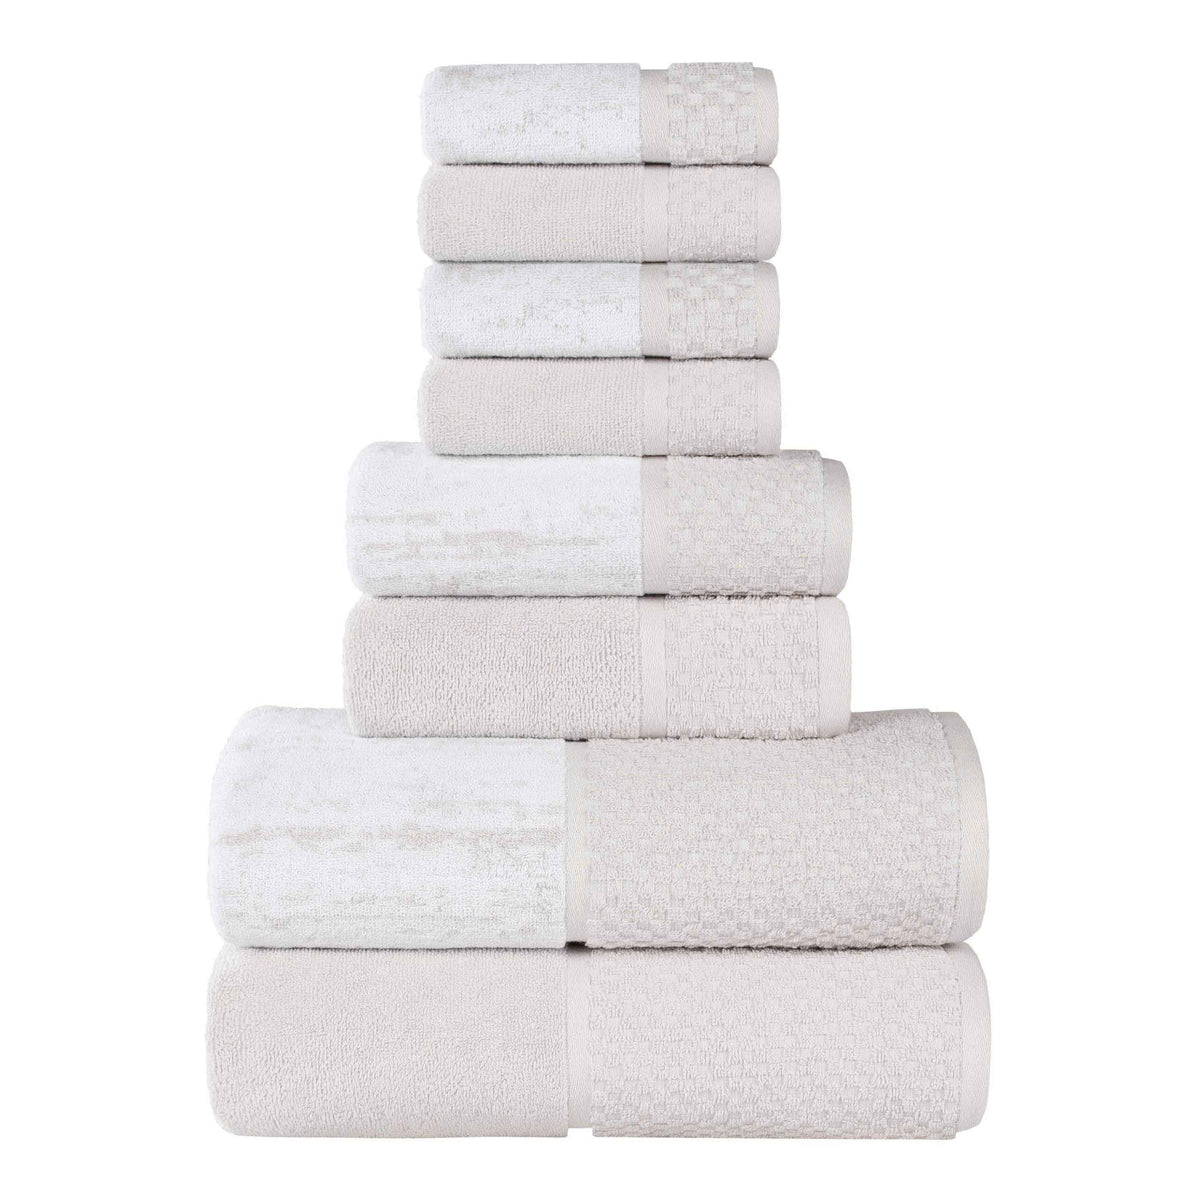 Lodie Cotton Jacquard Solid and Two-Toned 8 Piece Assorted Towel Set - Stone-White